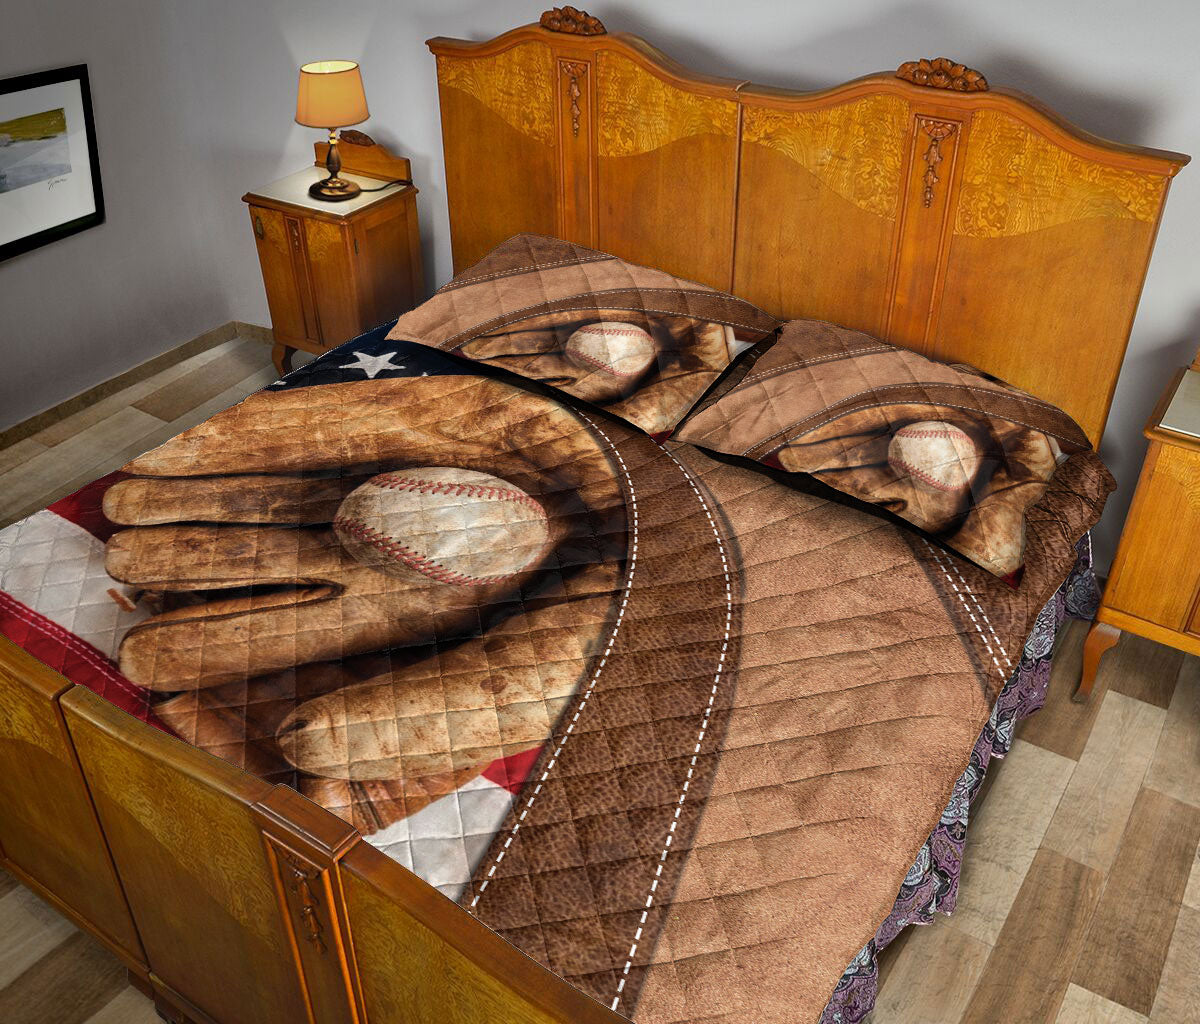 Ohaprints-Quilt-Bed-Set-Pillowcase-Baseball-Ball-Gloves-Brown-Pattern-Unique-Gift-For-Baseball-Sports-Lover-Blanket-Bedspread-Bedding-865-Queen (80'' x 90'')